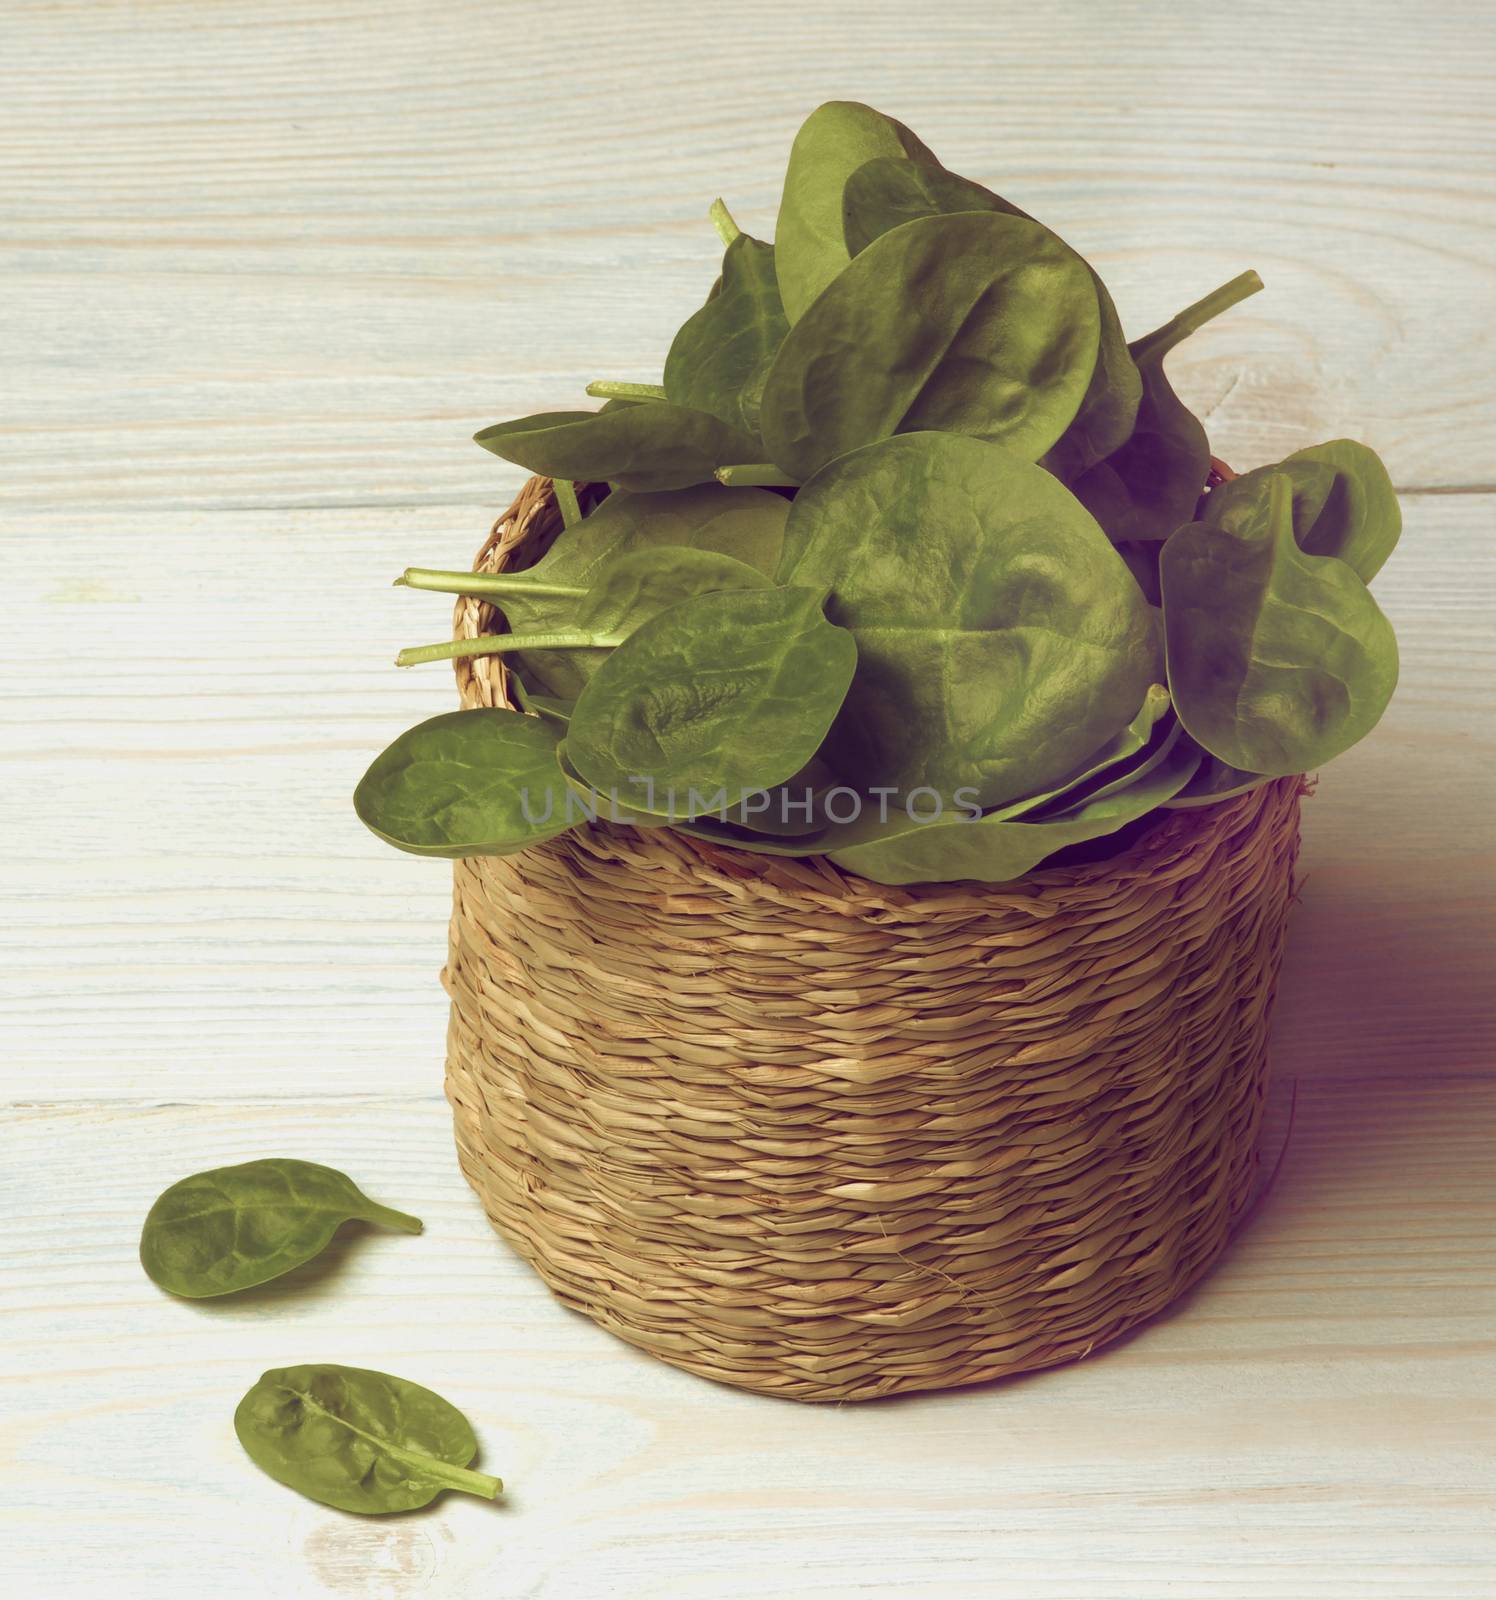 Arrangement of Small Raw Spinach Leafs in Wicker Cask closeup on Light Blue Wooden background. Retro Styled